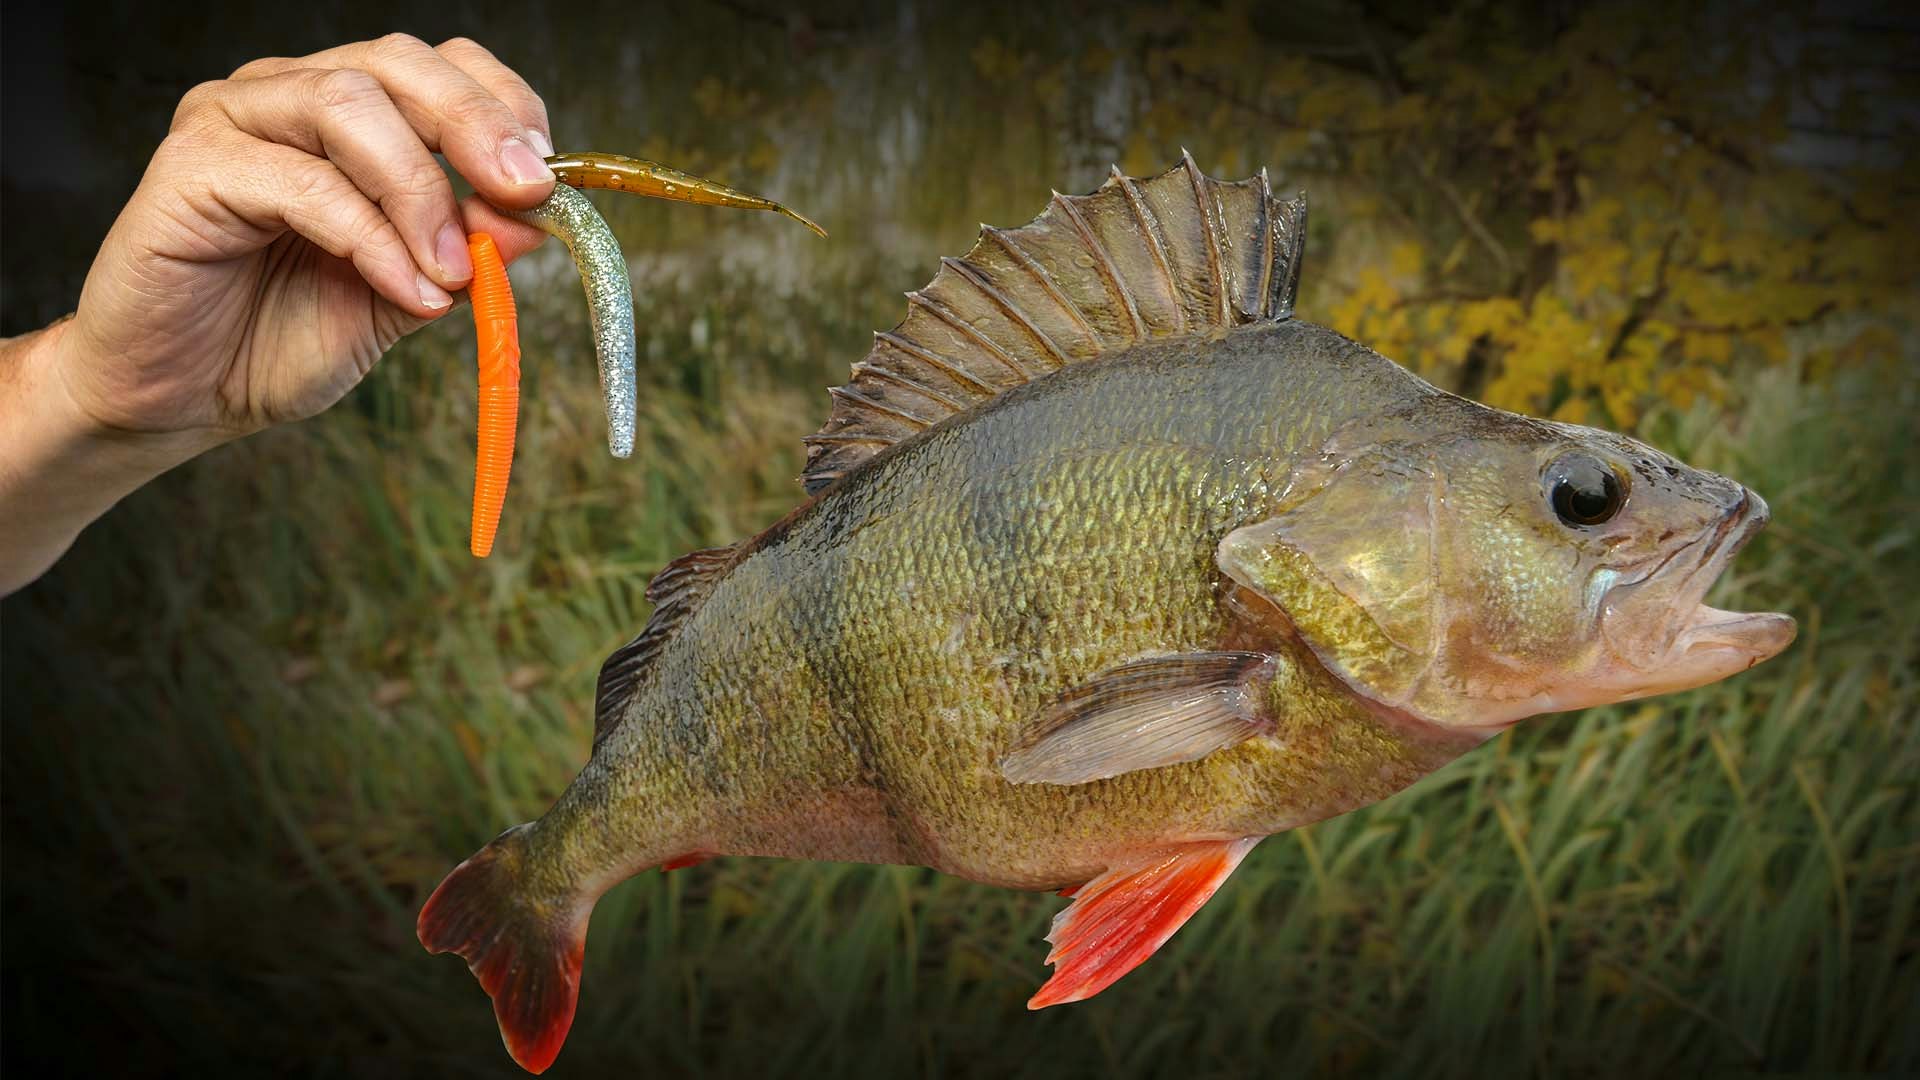 Get on the Ned rig for big perch